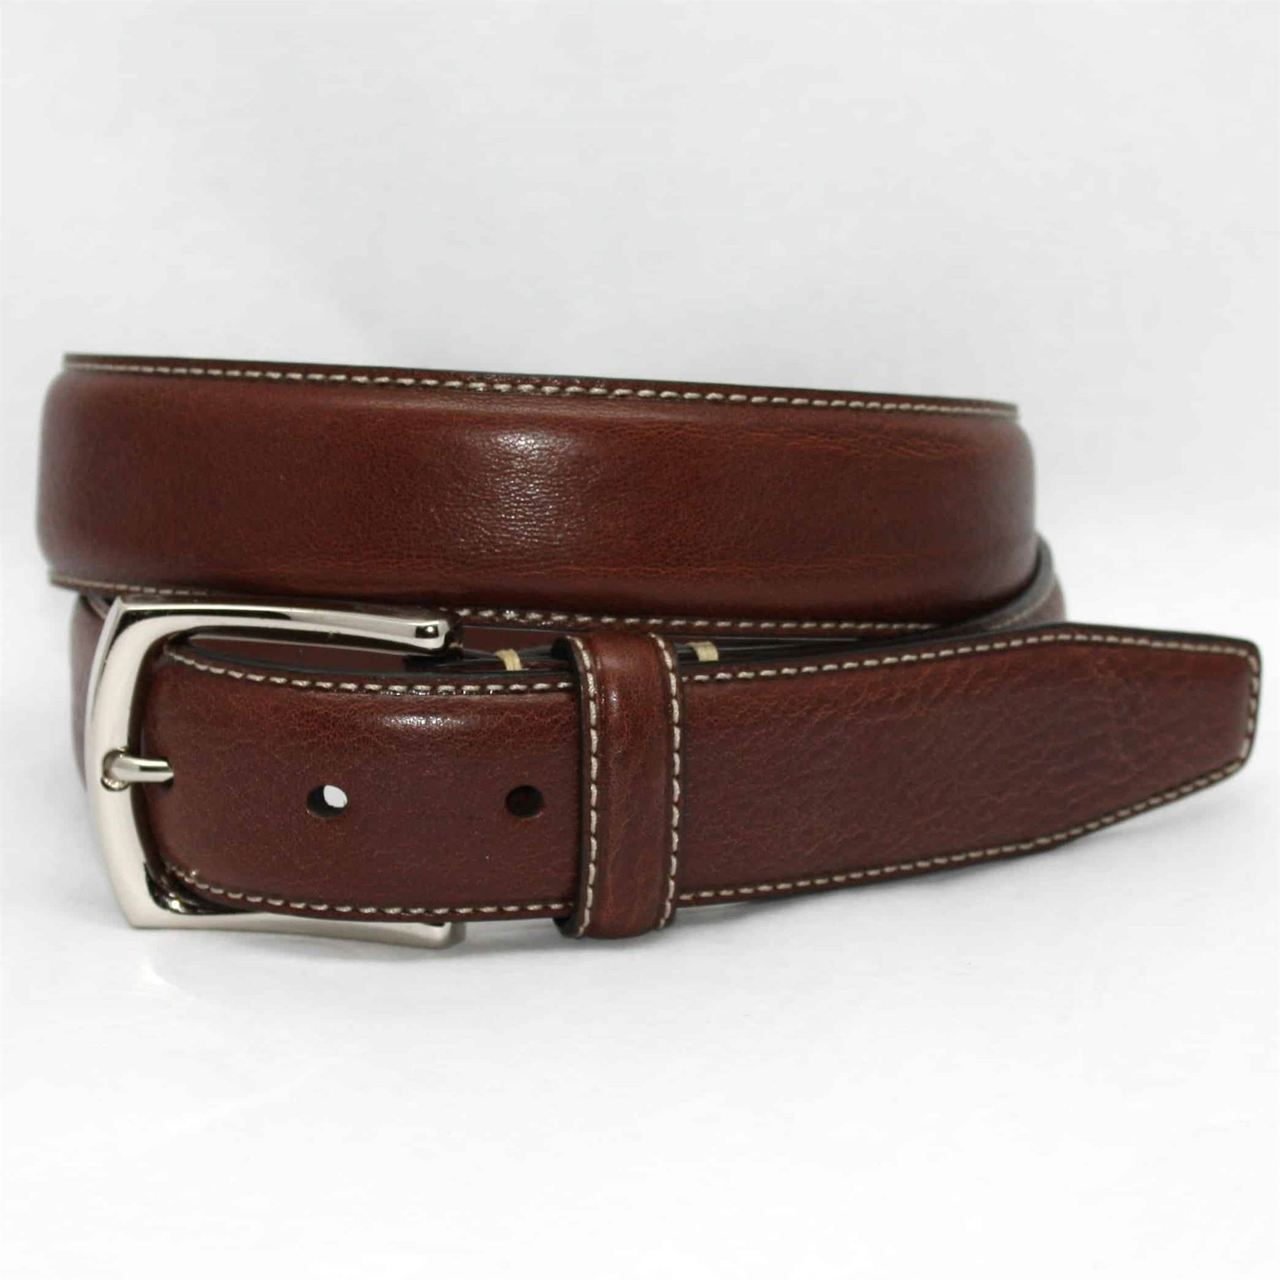 Burnished Tumbled Leather Belt in Brown by Torino Leather Co